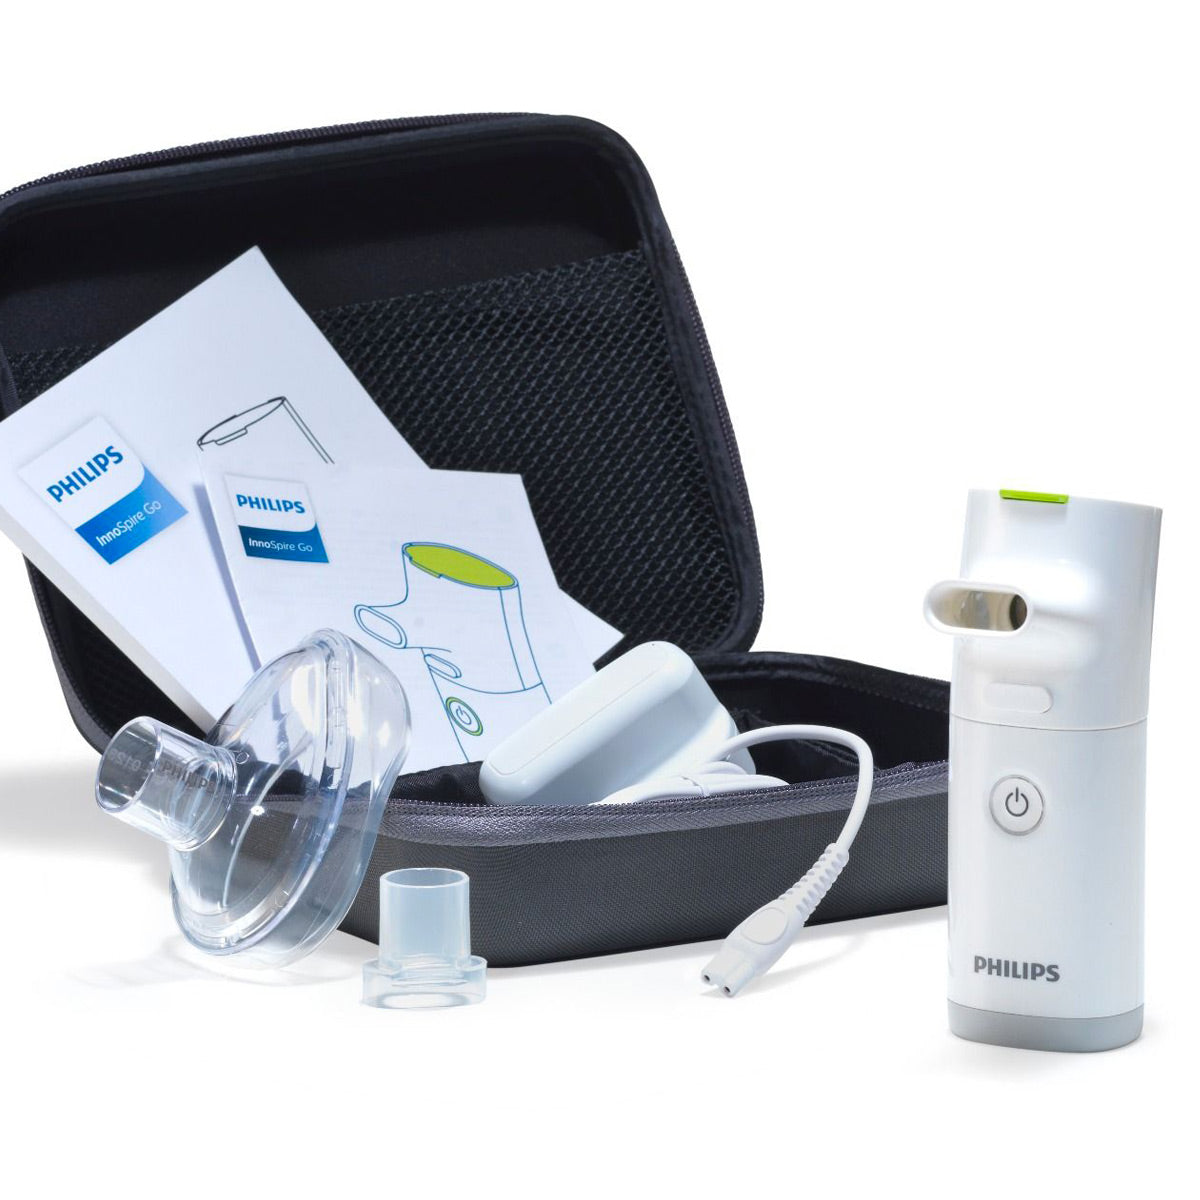 InnoSpire Go Portable Mesh Nebulizer Kit with Rechargeable Battery